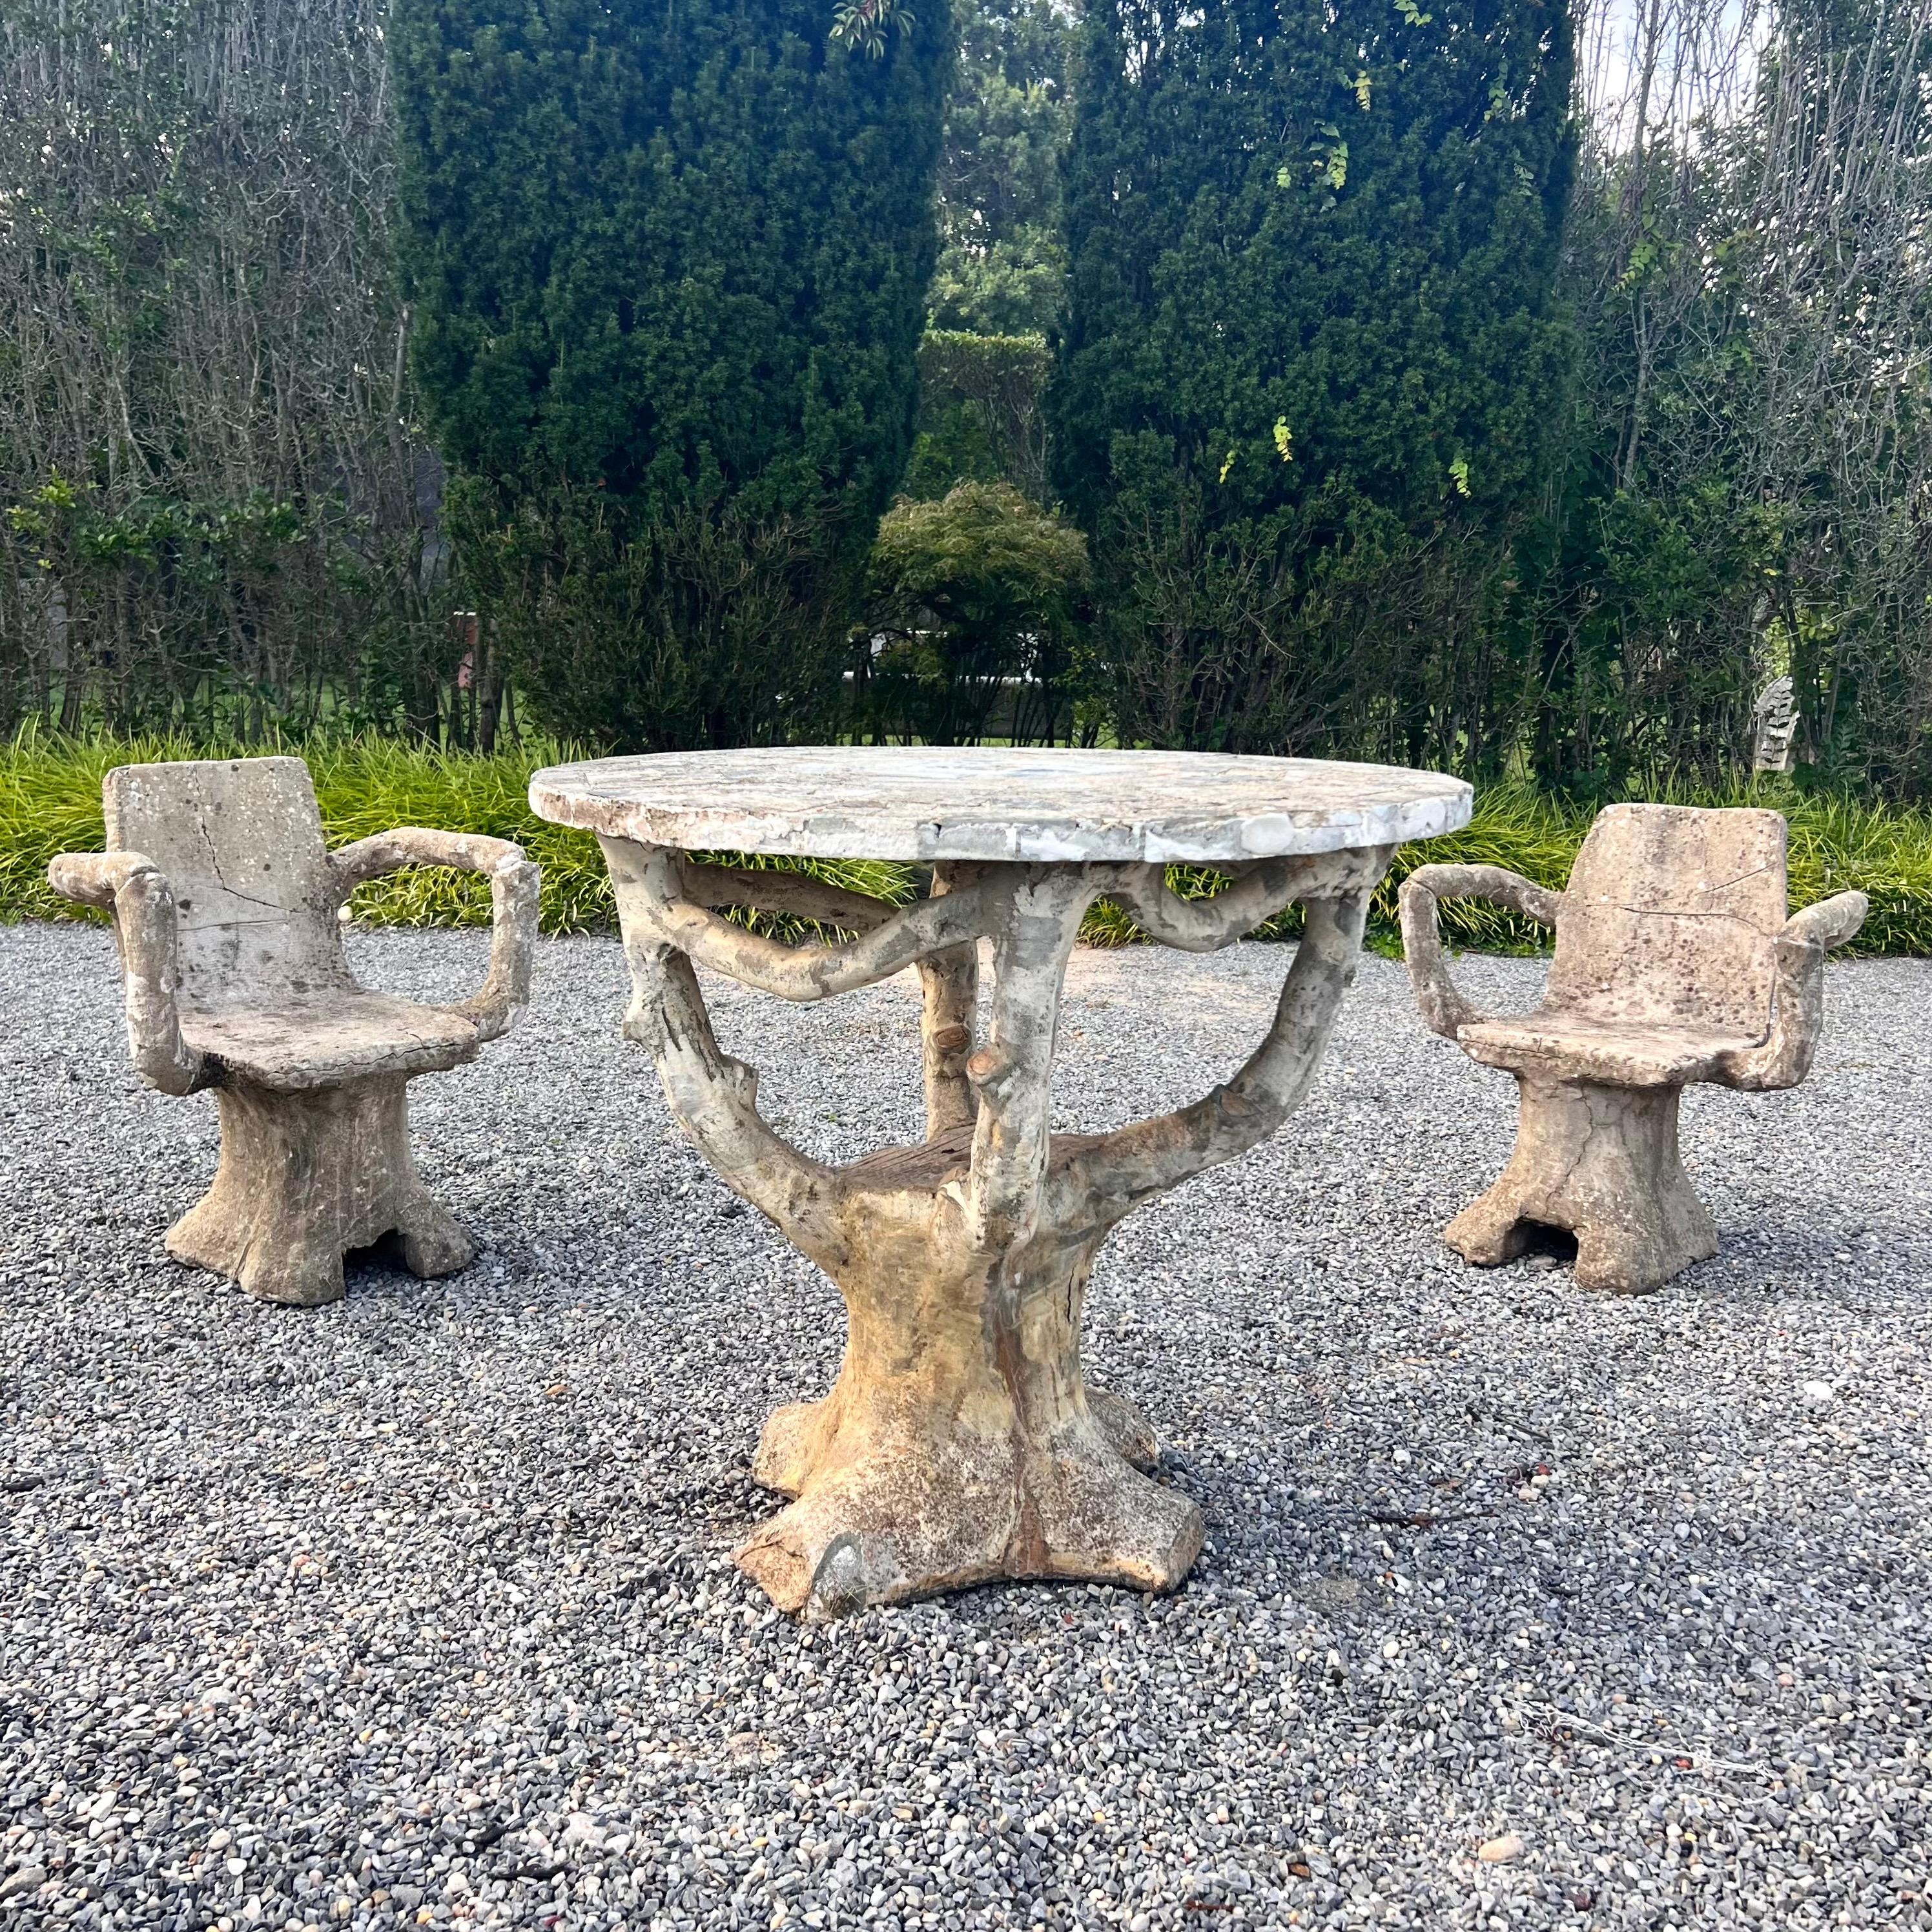 Mid-20th Century Anthropomorphic Faux Bois Concrete Table and 4 Chairs, 1950s France